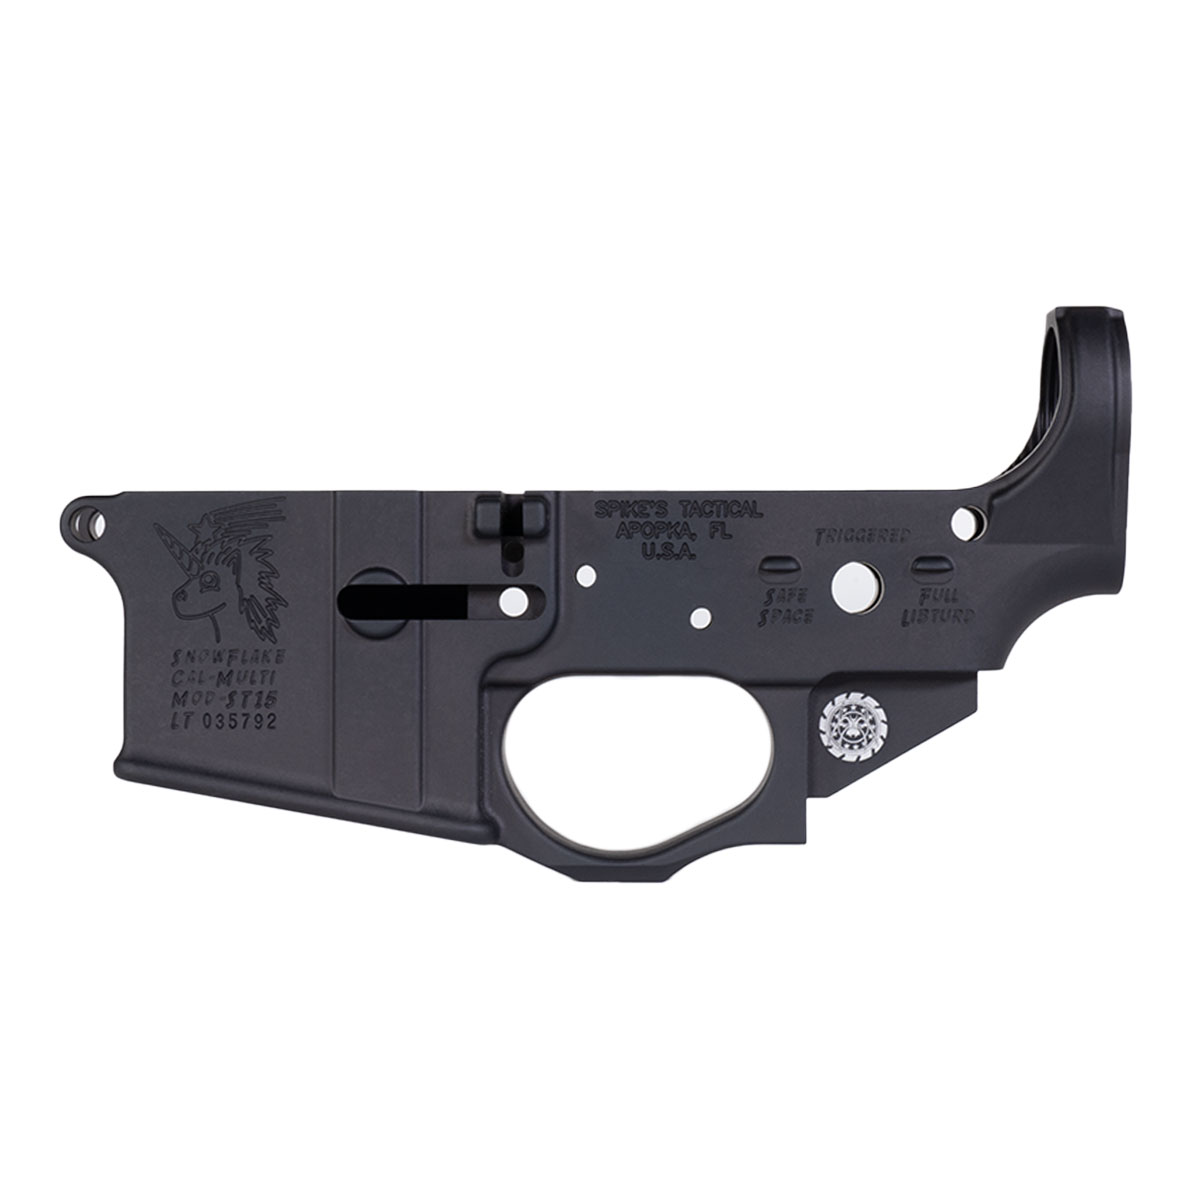 Spike's Tactical Lower Receiver, Stripped - Snowflake (Non Color Filled) - BLEM